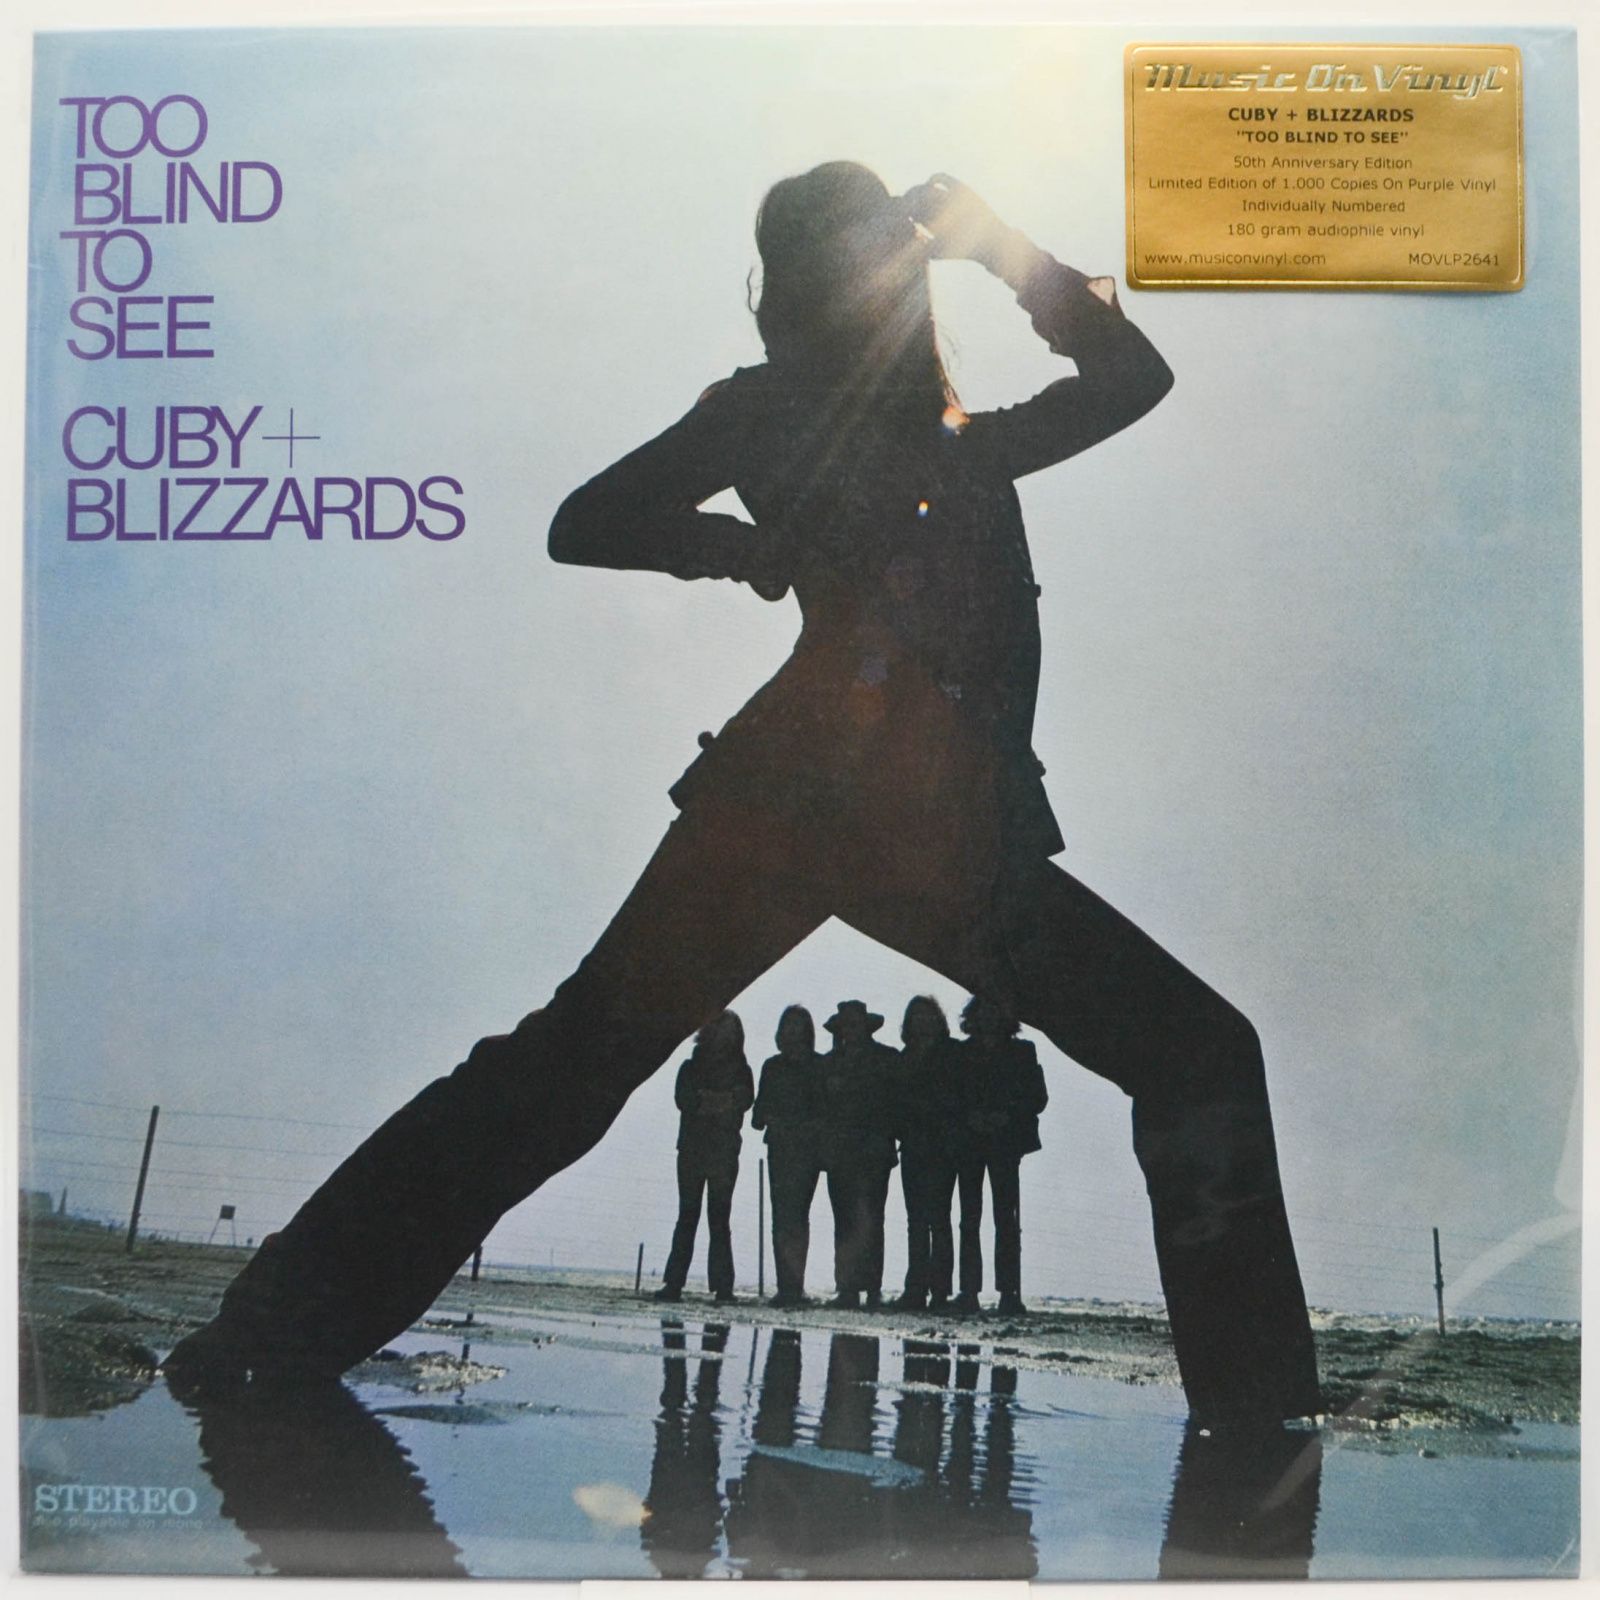 Too Blind To See, 1970